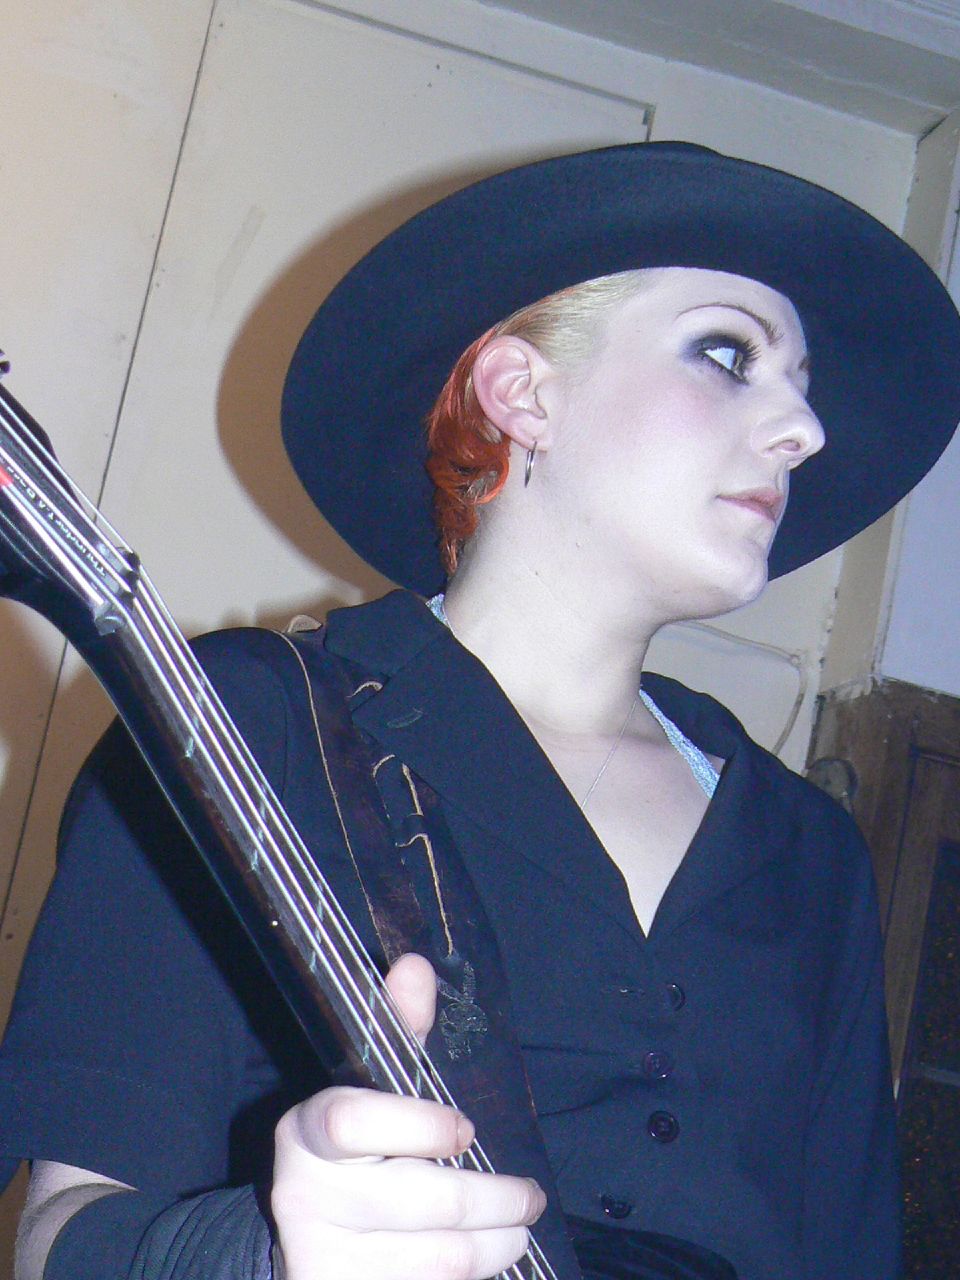 a girl in a hat playing an electric guitar